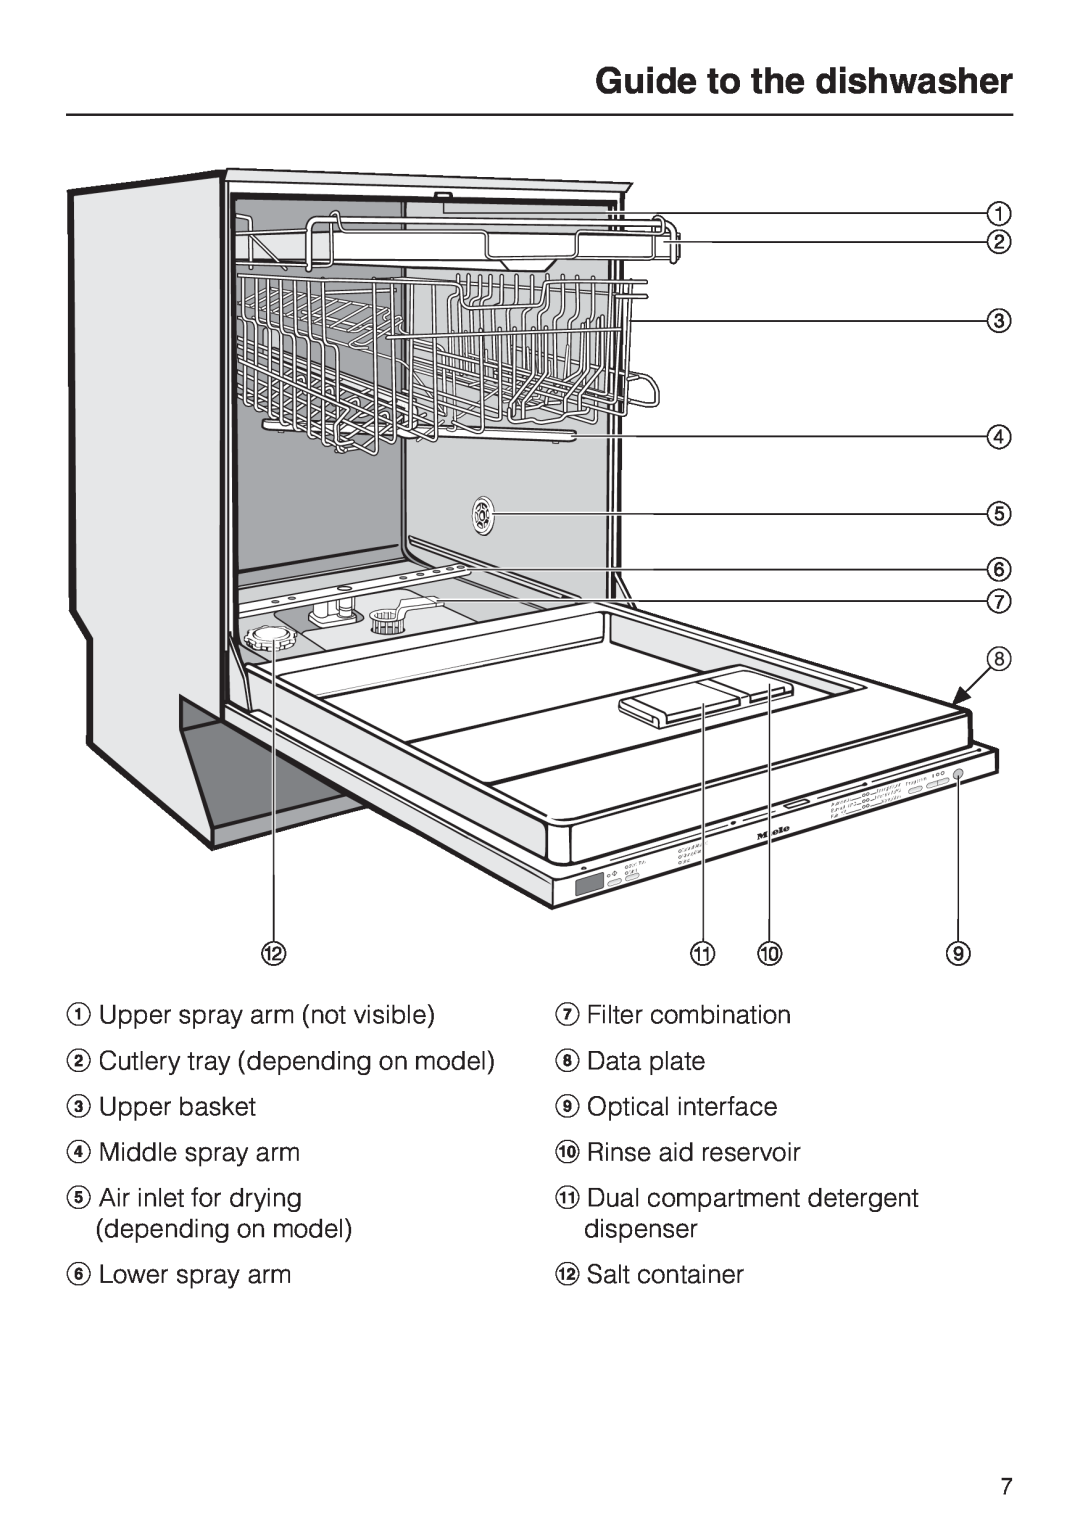 Miele G 2470, G 1470 manual Guide to the dishwasher 